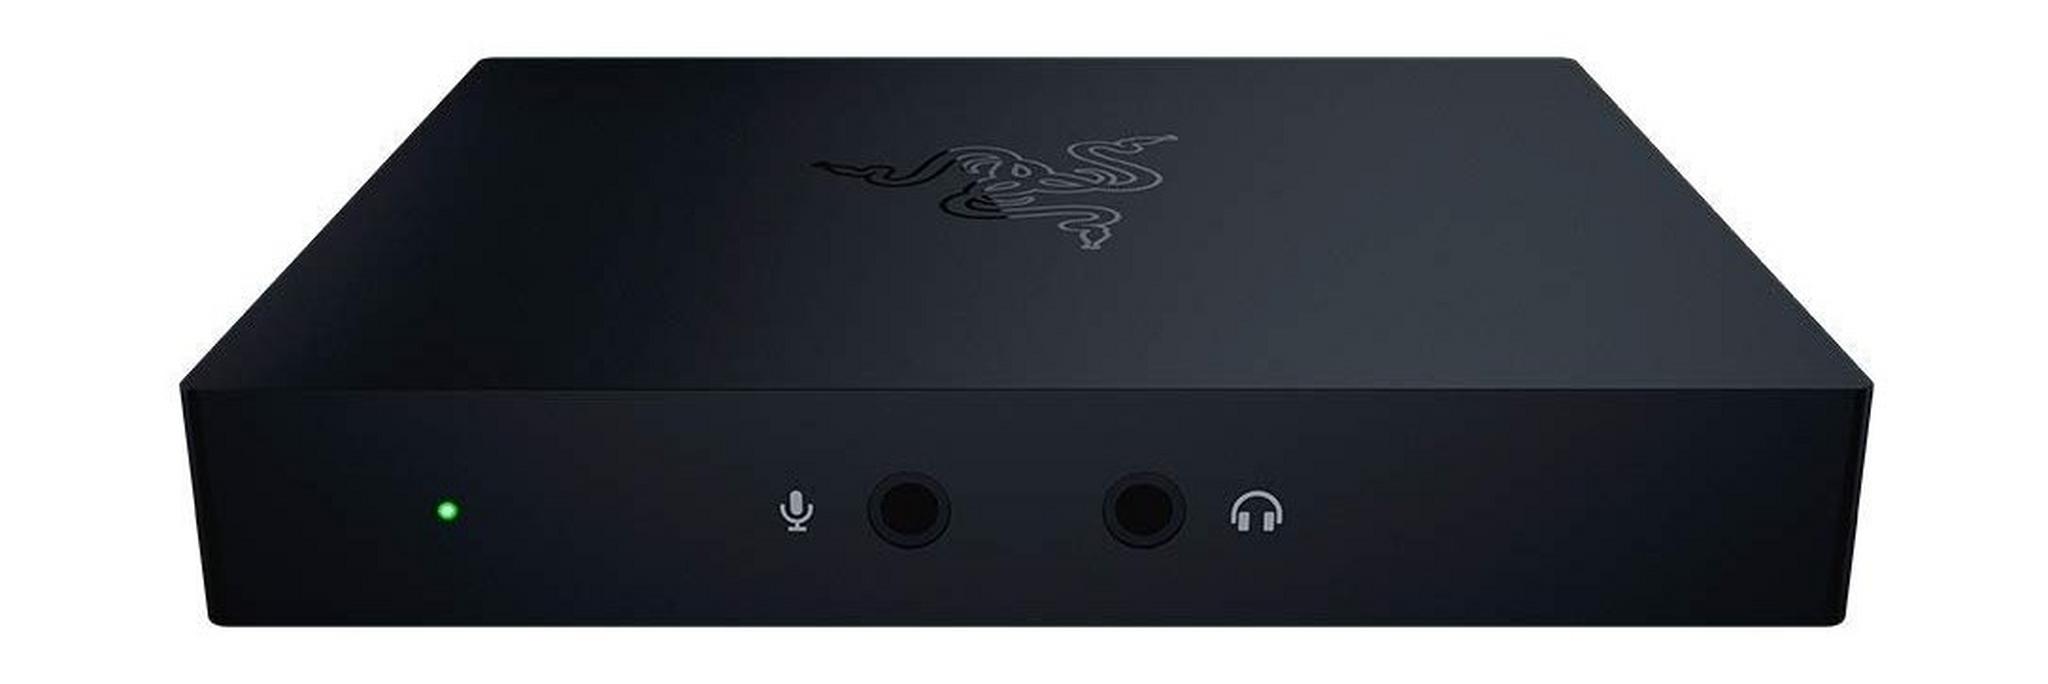 Razer Ripsaw HD Game Streaming Capture Card